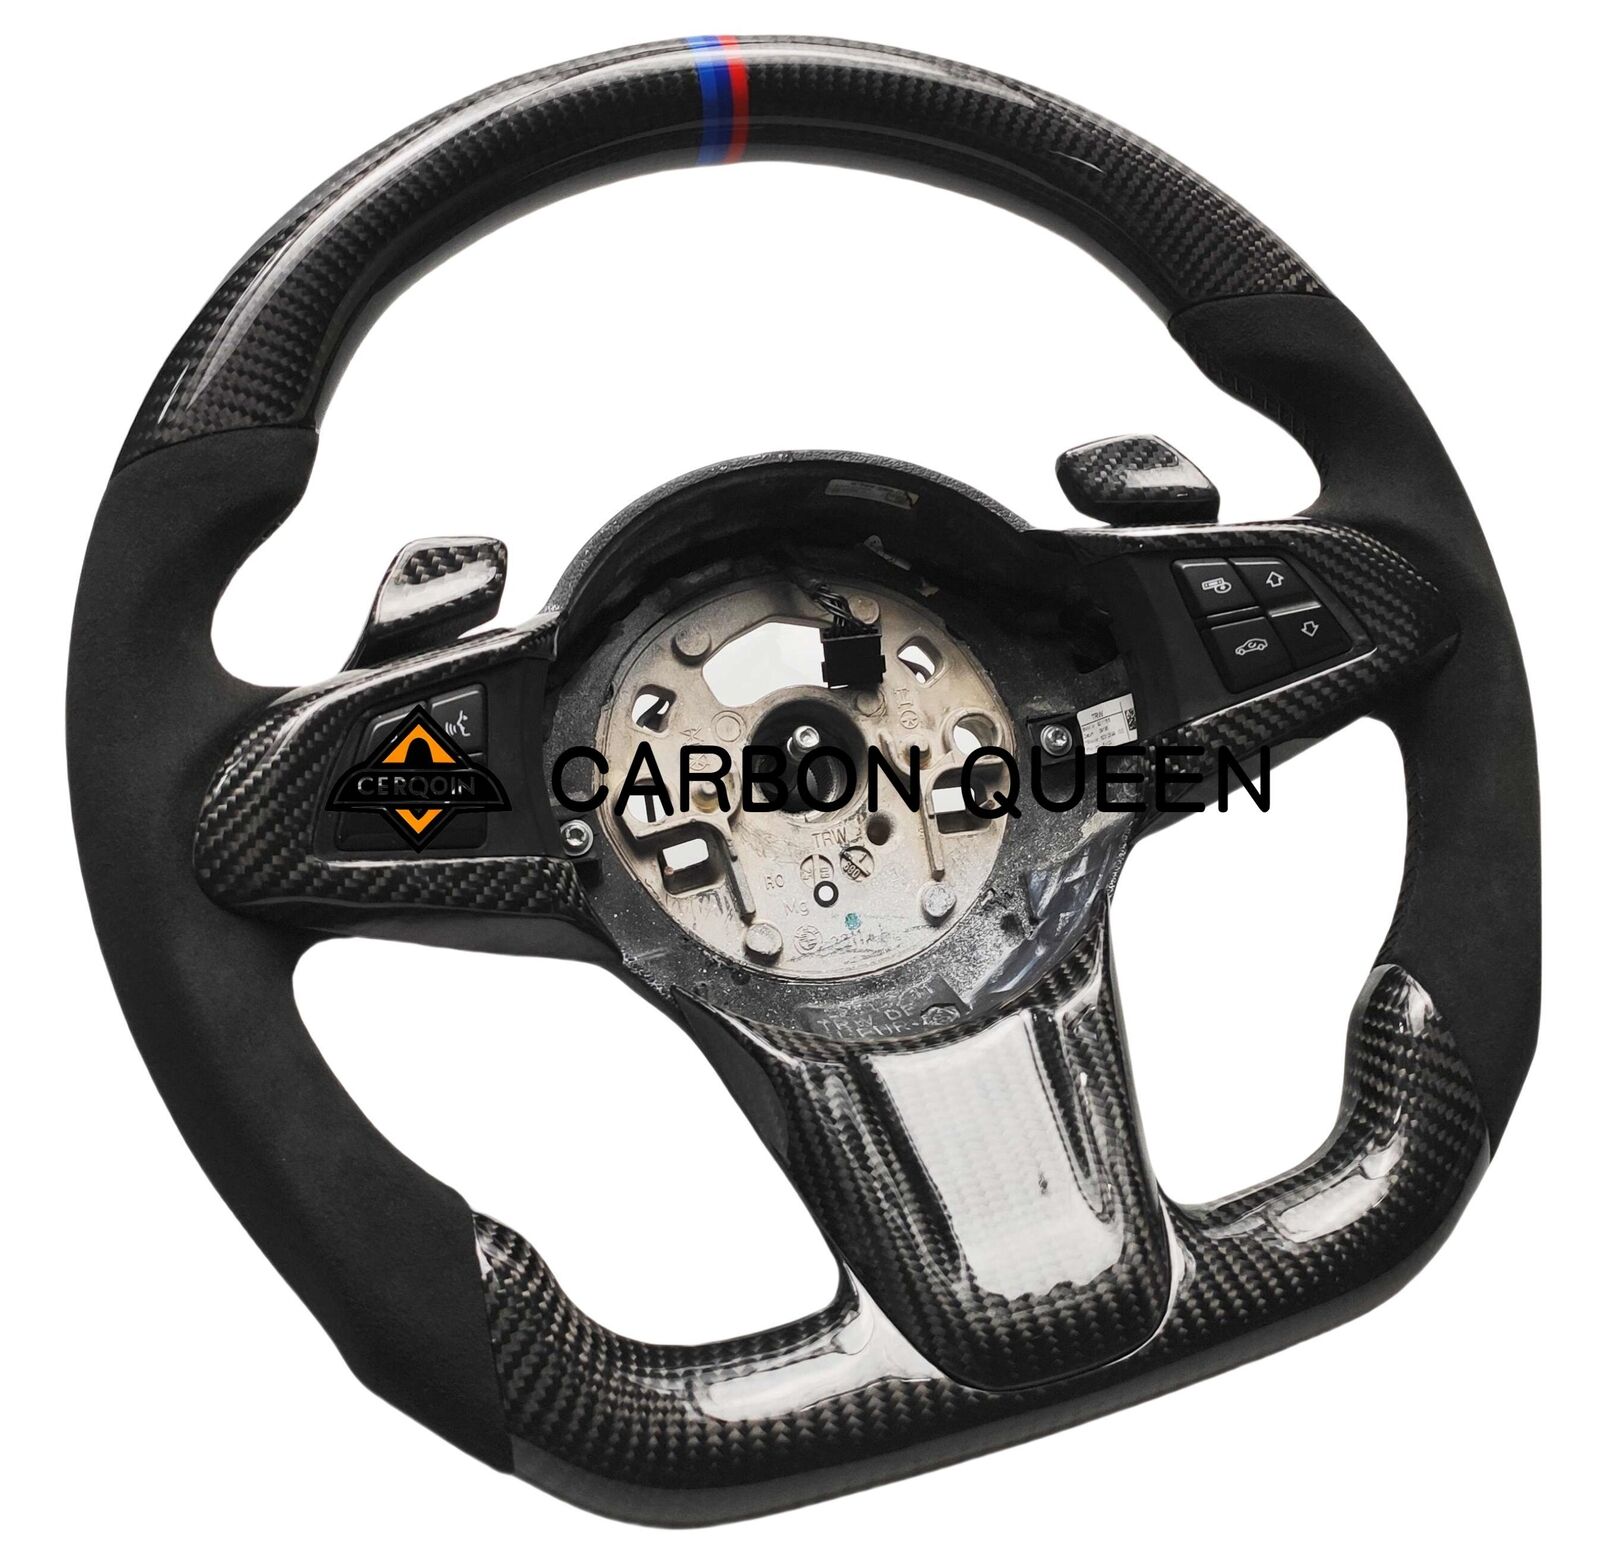 REAL CARBON FIBER Steering Wheel FOR BMW Z4 E86 W/BUTTONS AND PADDLES 09-16 YEAR